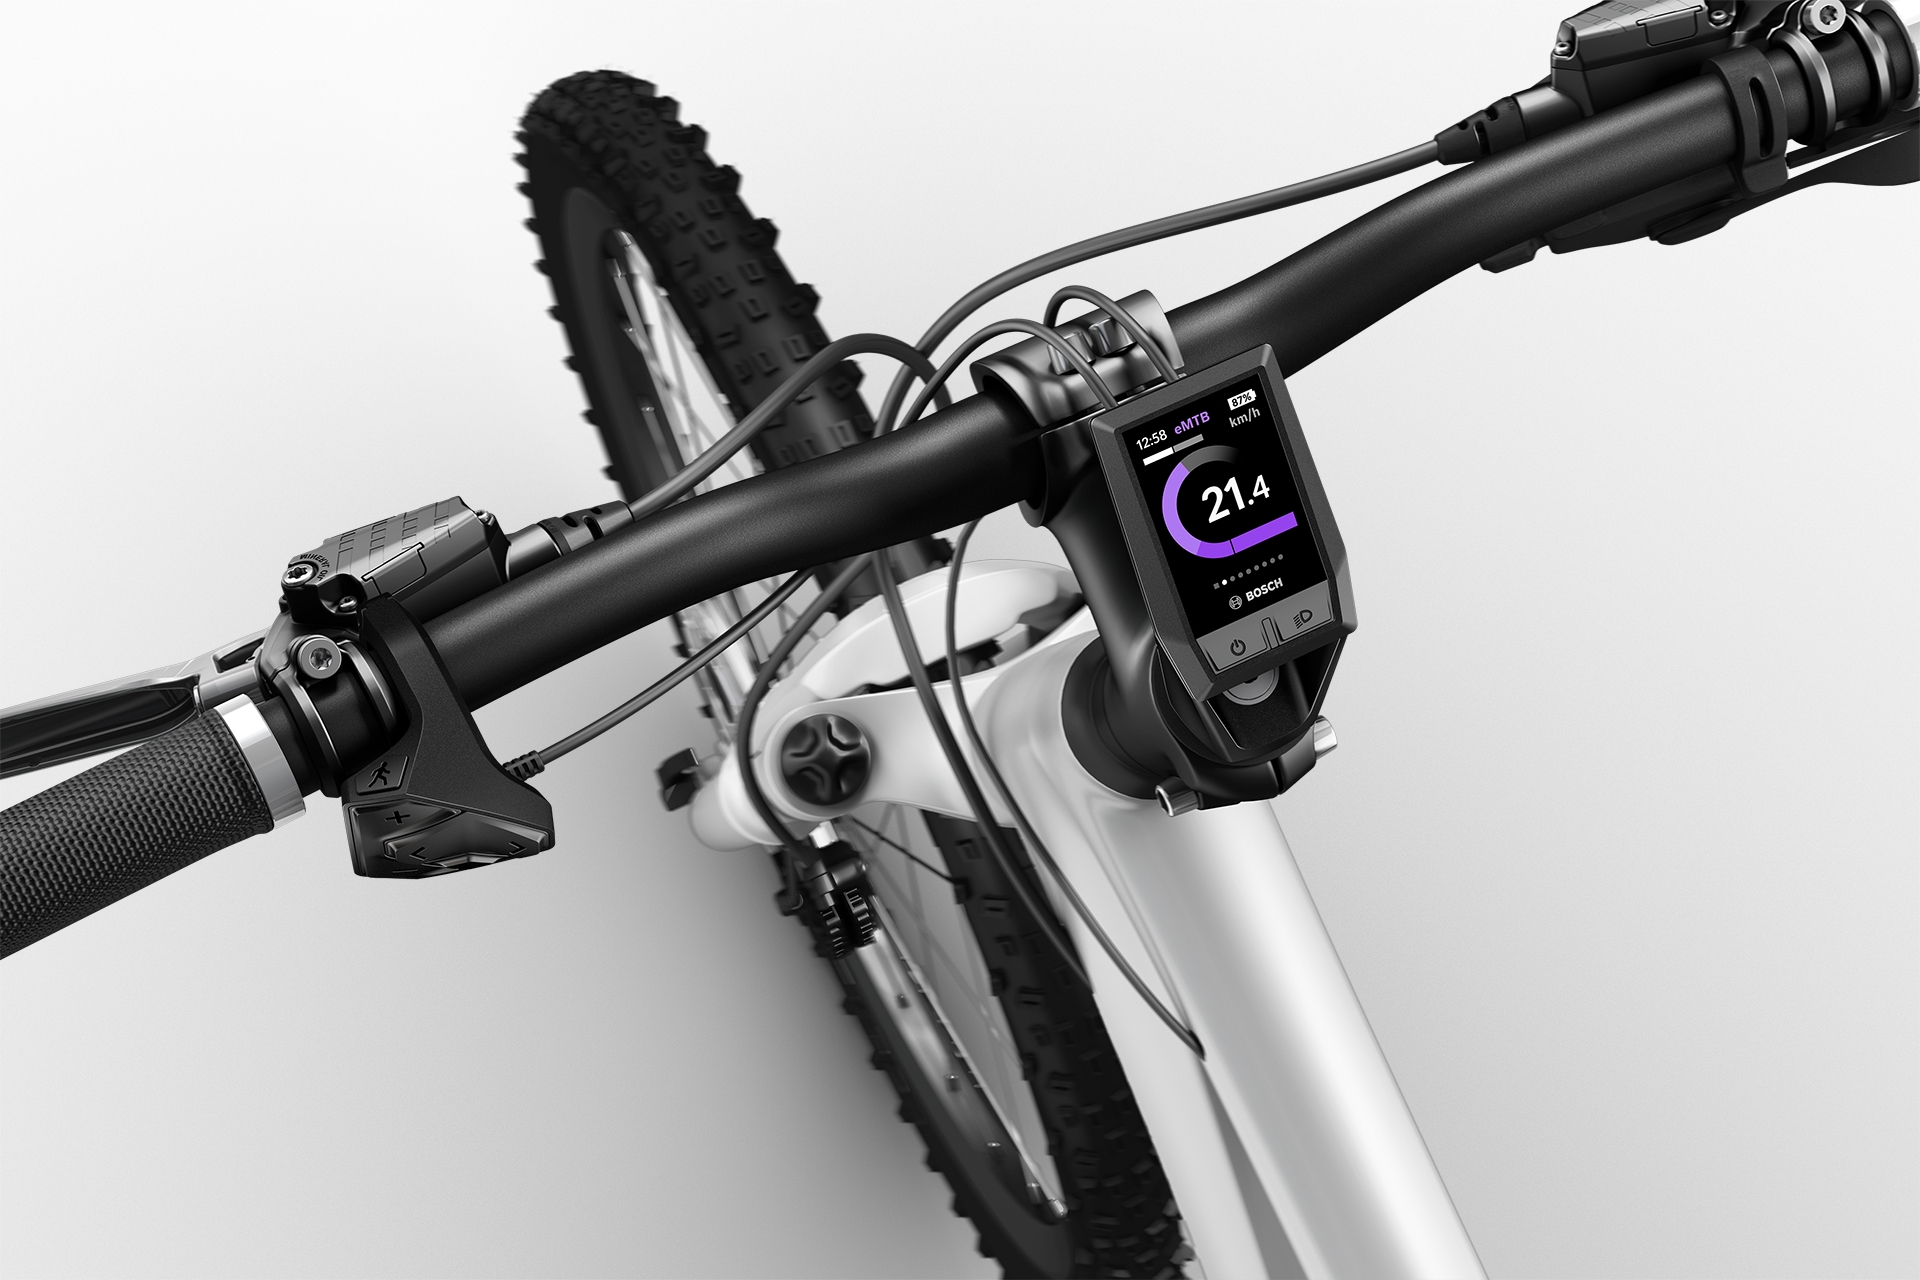 Bosch Kiox display for sporty eBikers launched